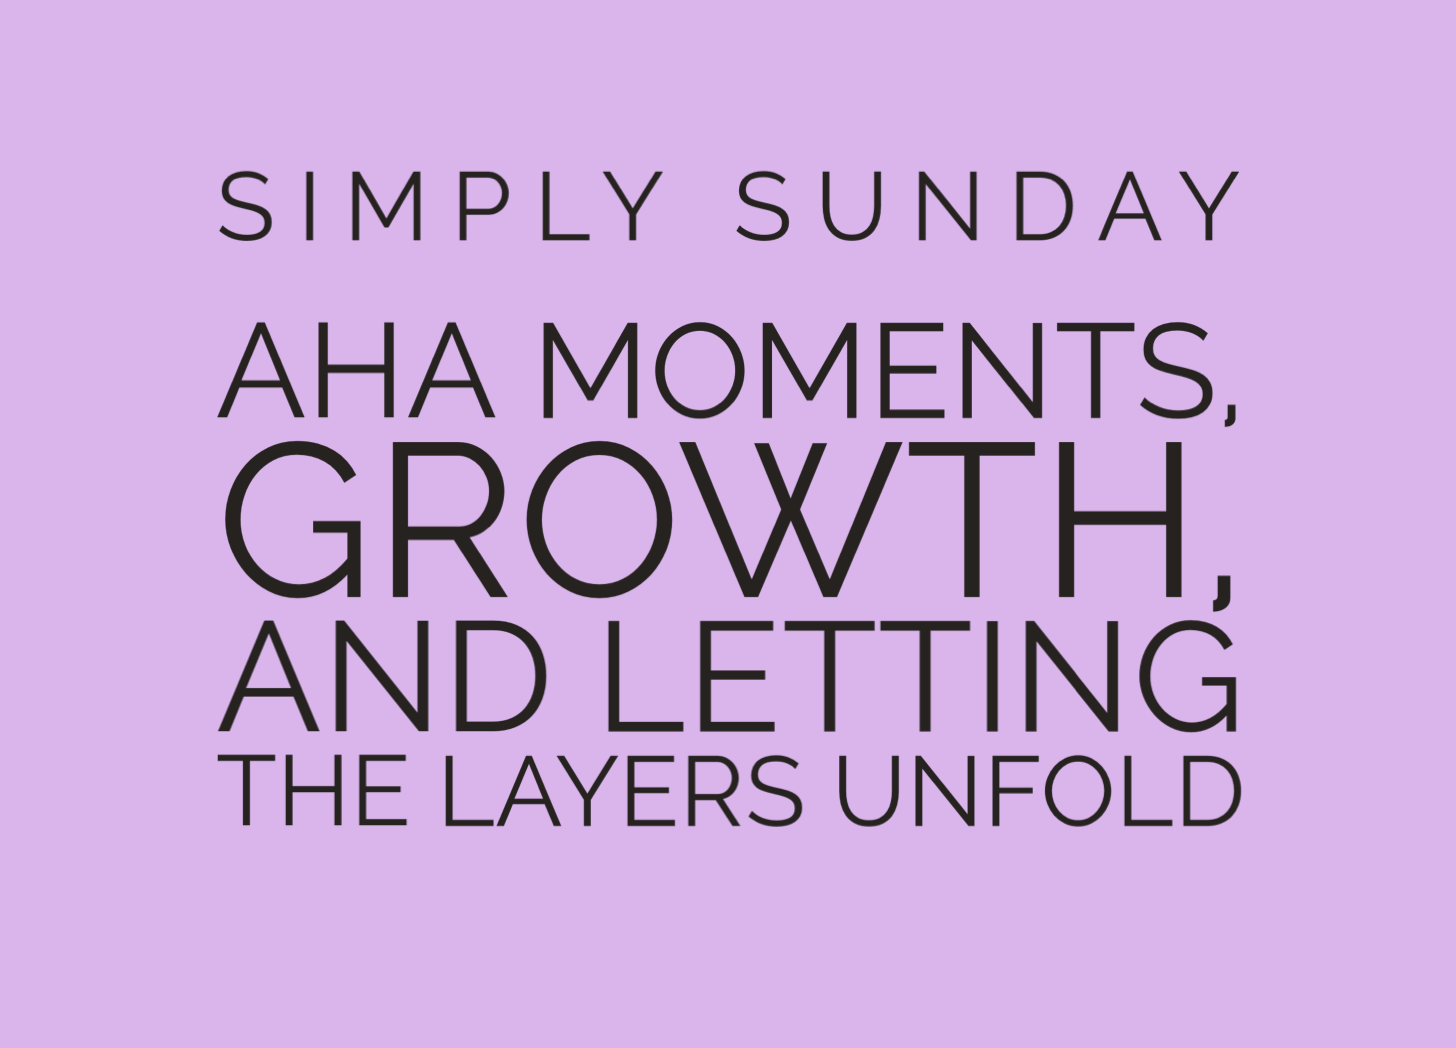 Aha moments, growth, and letting layers unfold